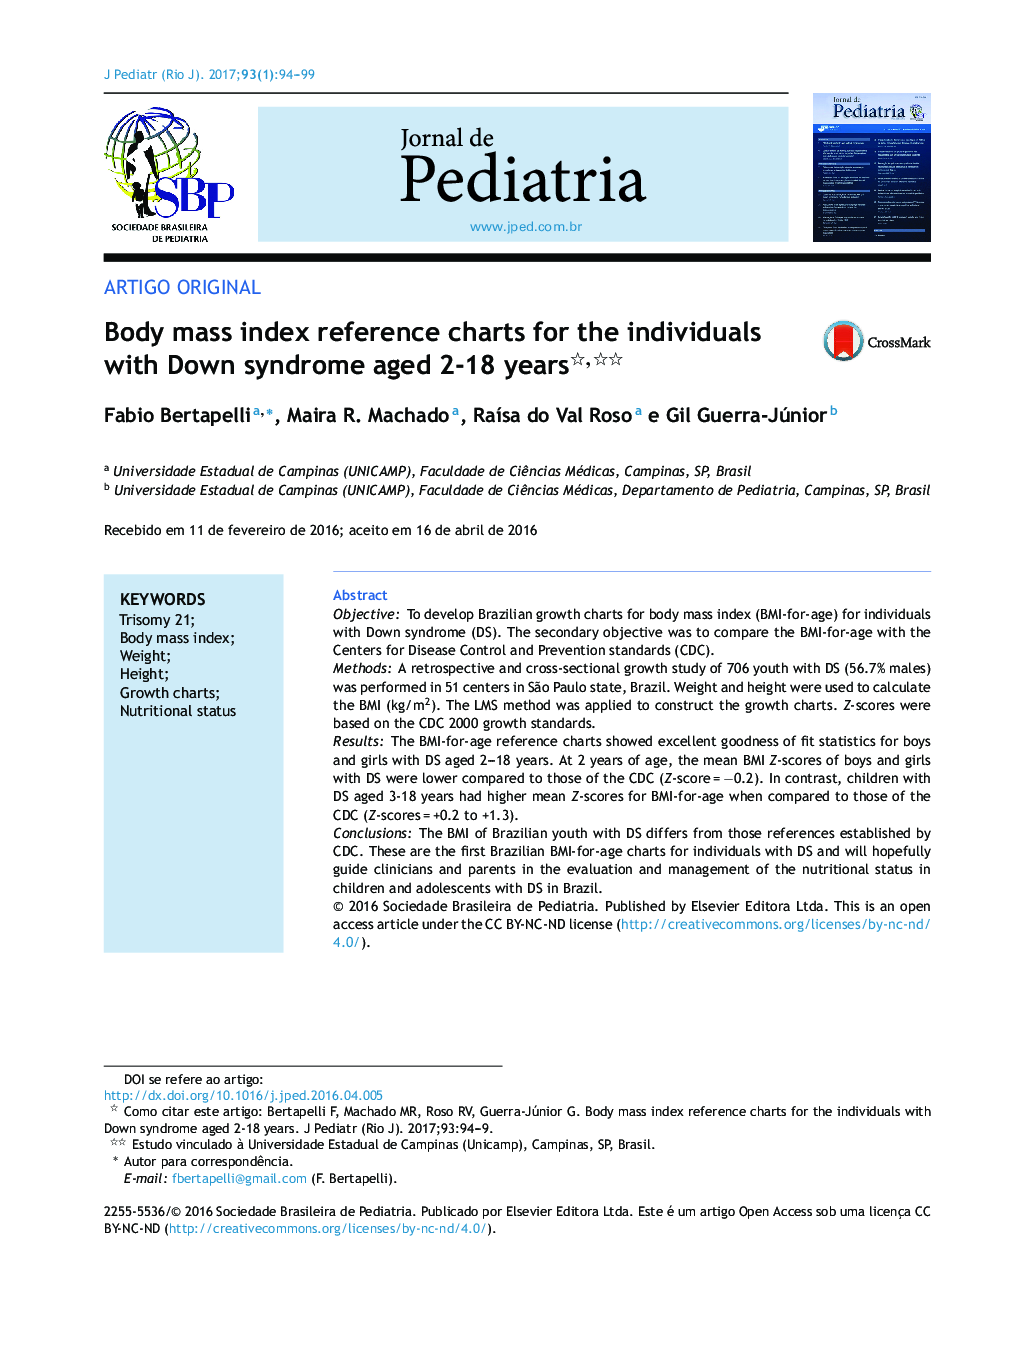 Body mass index reference charts for the individuals with Down syndrome aged 2â18 years